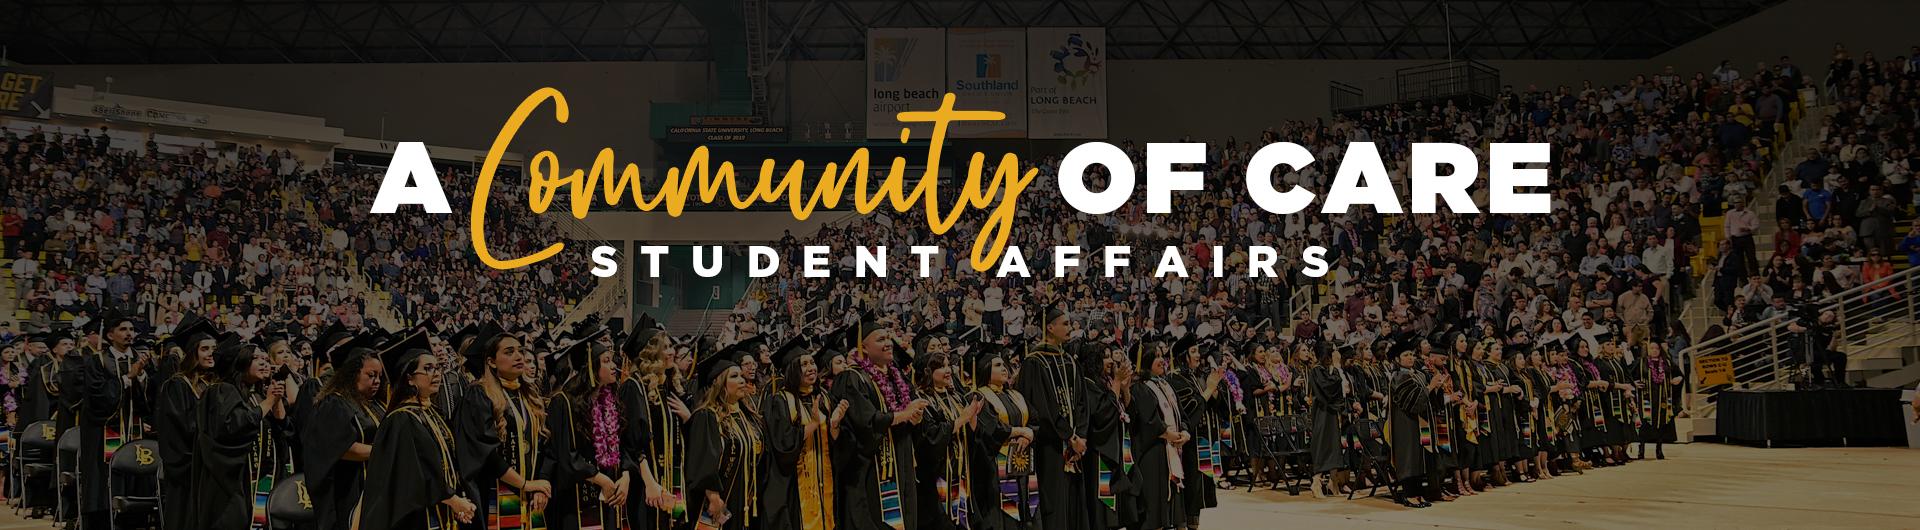 A Community of Care - Student Affairs